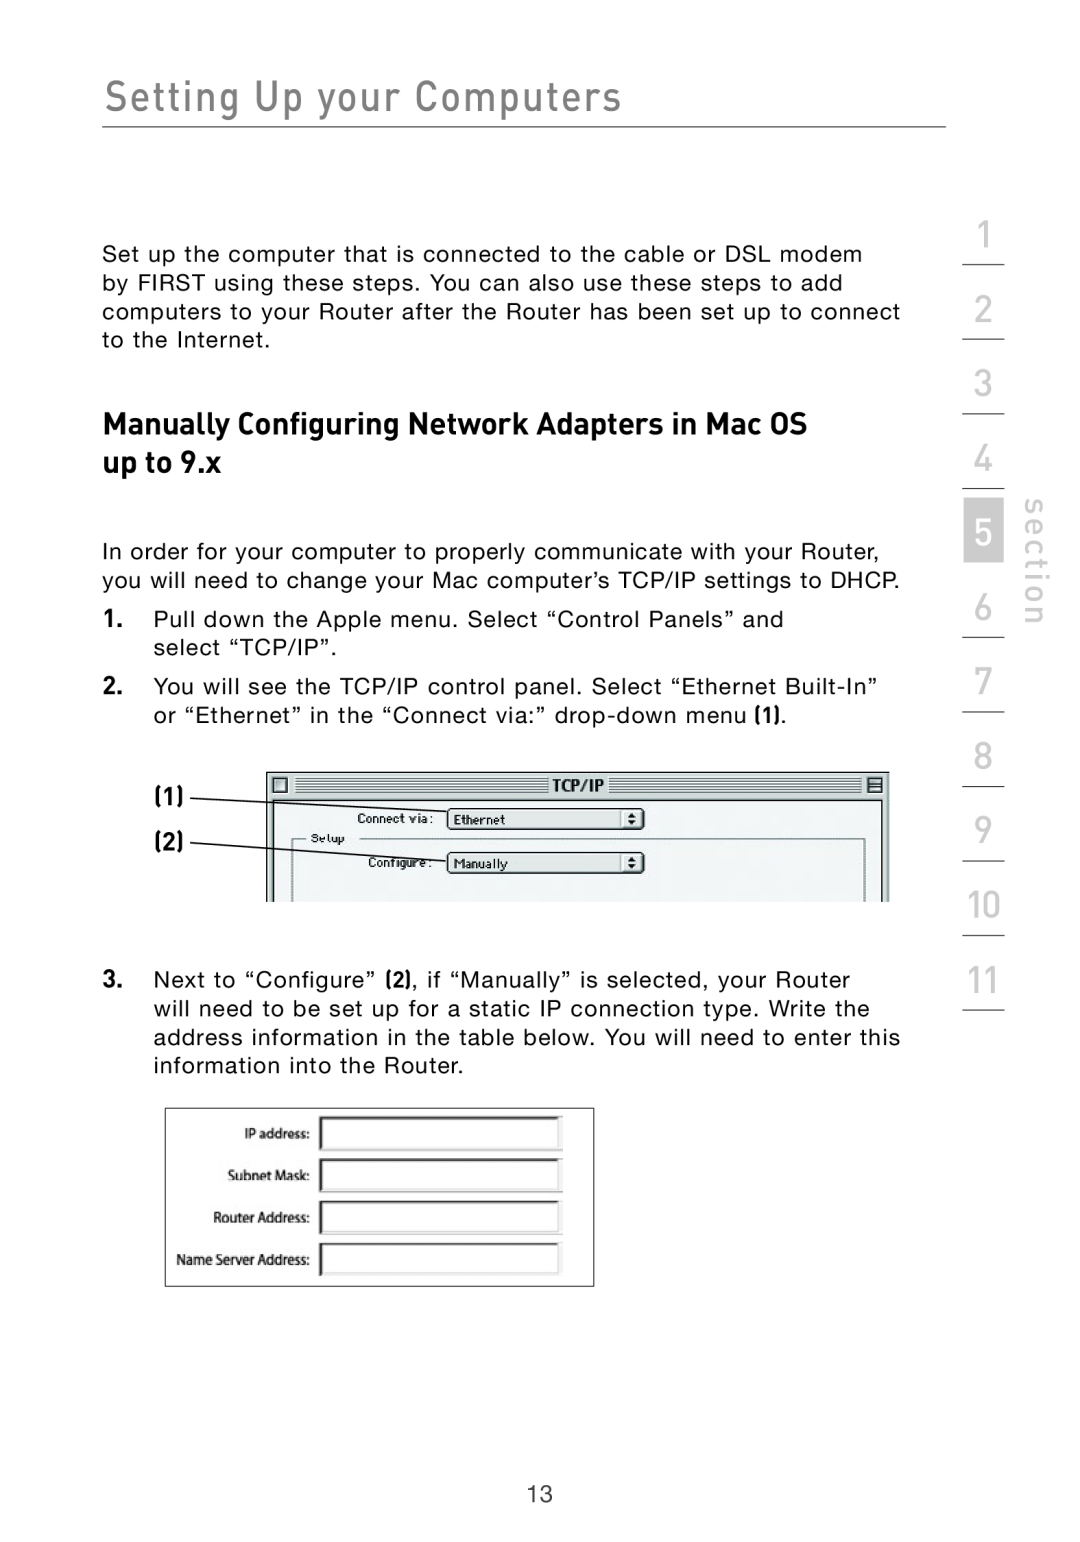 Belkin Pre-N manual Manually Configuring Network Adapters in Mac OS up to, Setting Up your Computers, section 